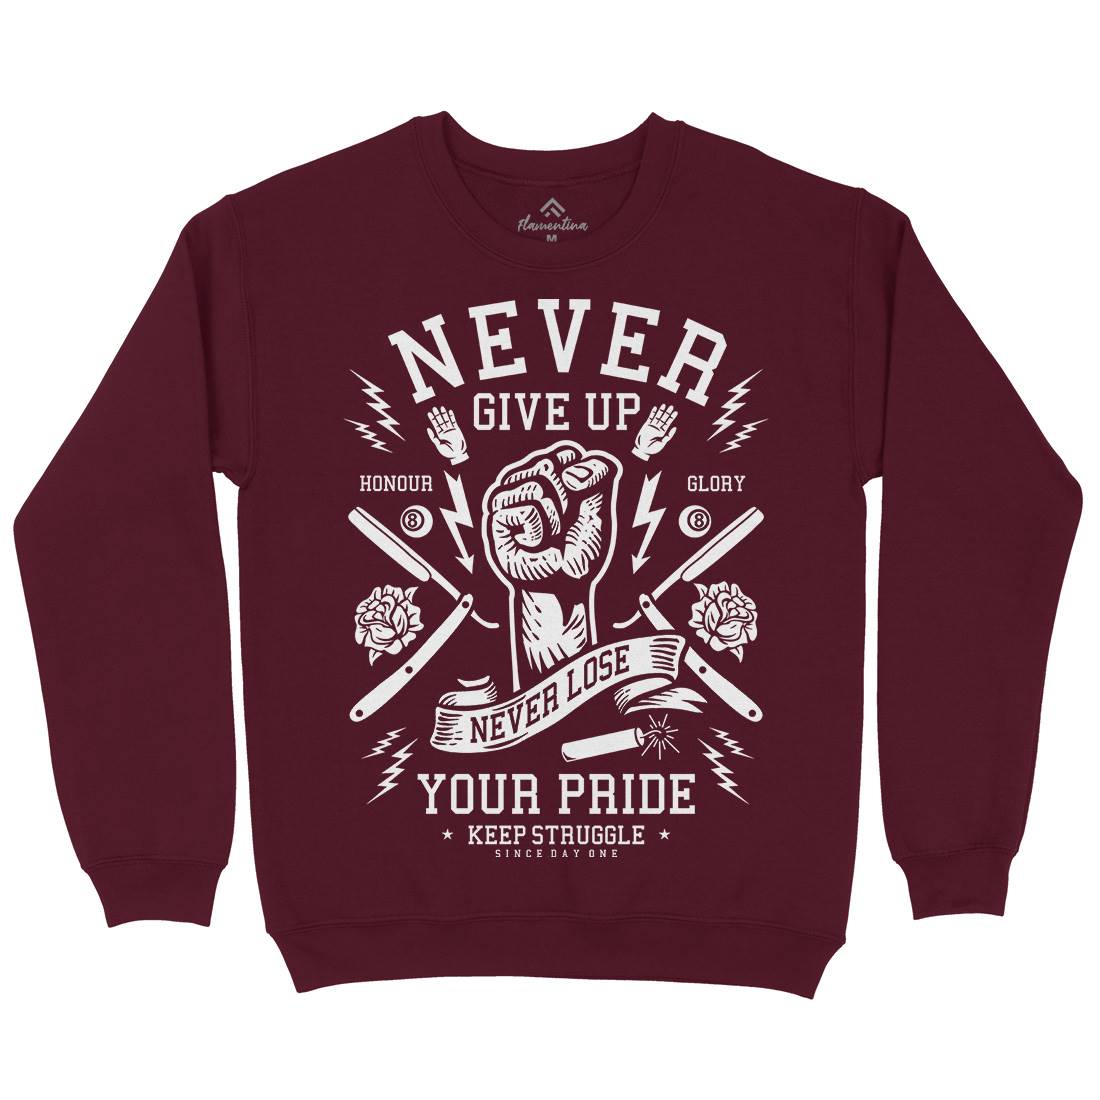 Never Give Up Kids Crew Neck Sweatshirt Quotes A254